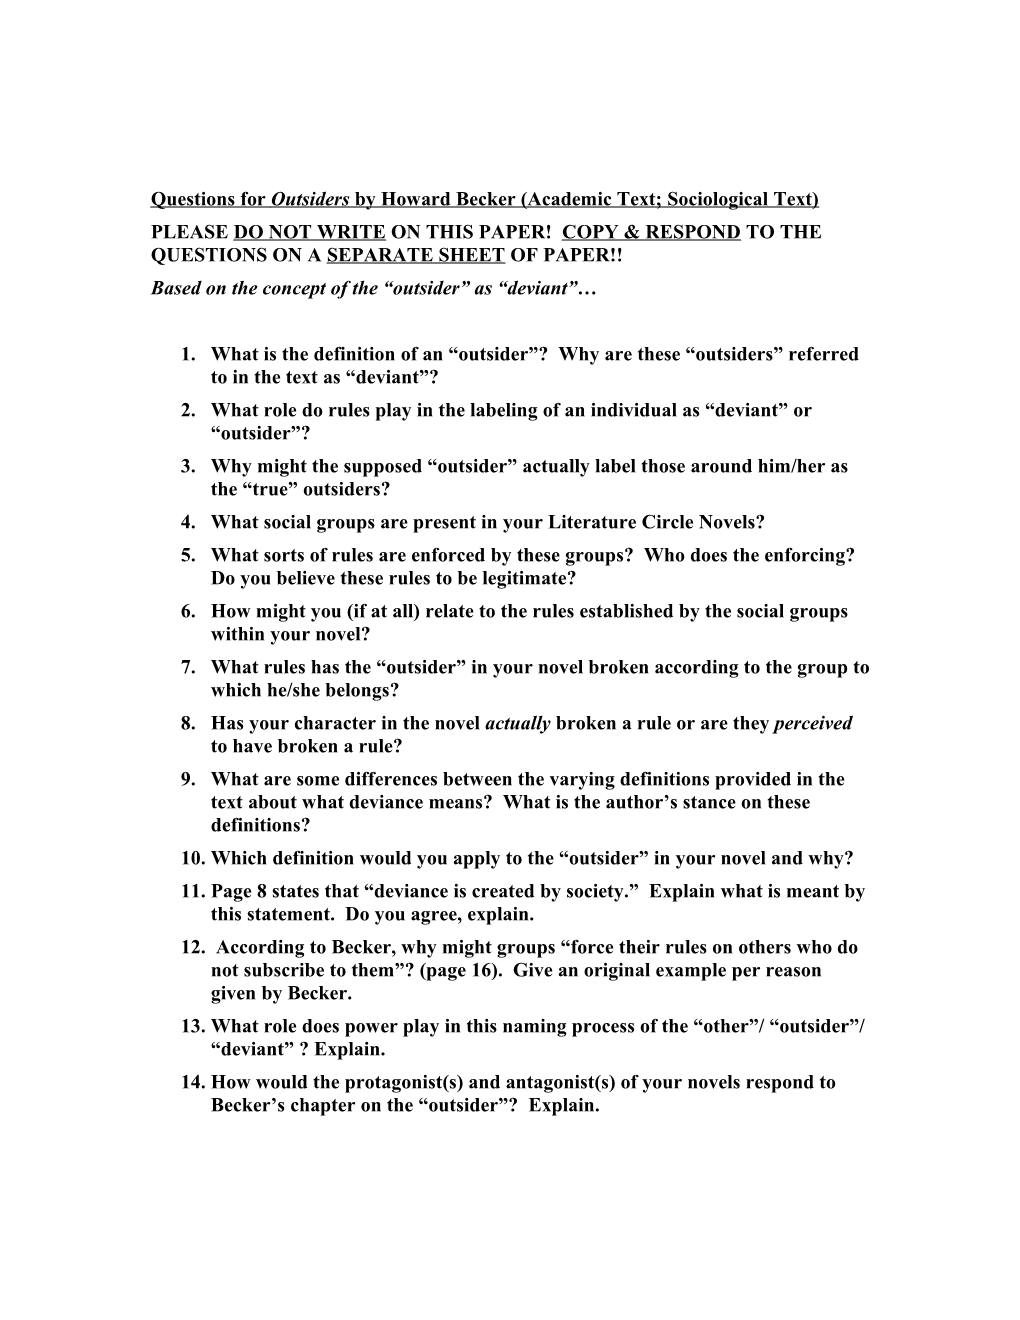 Questions for Outsiders by Howard Becker (Academic Text; Sociological Text)